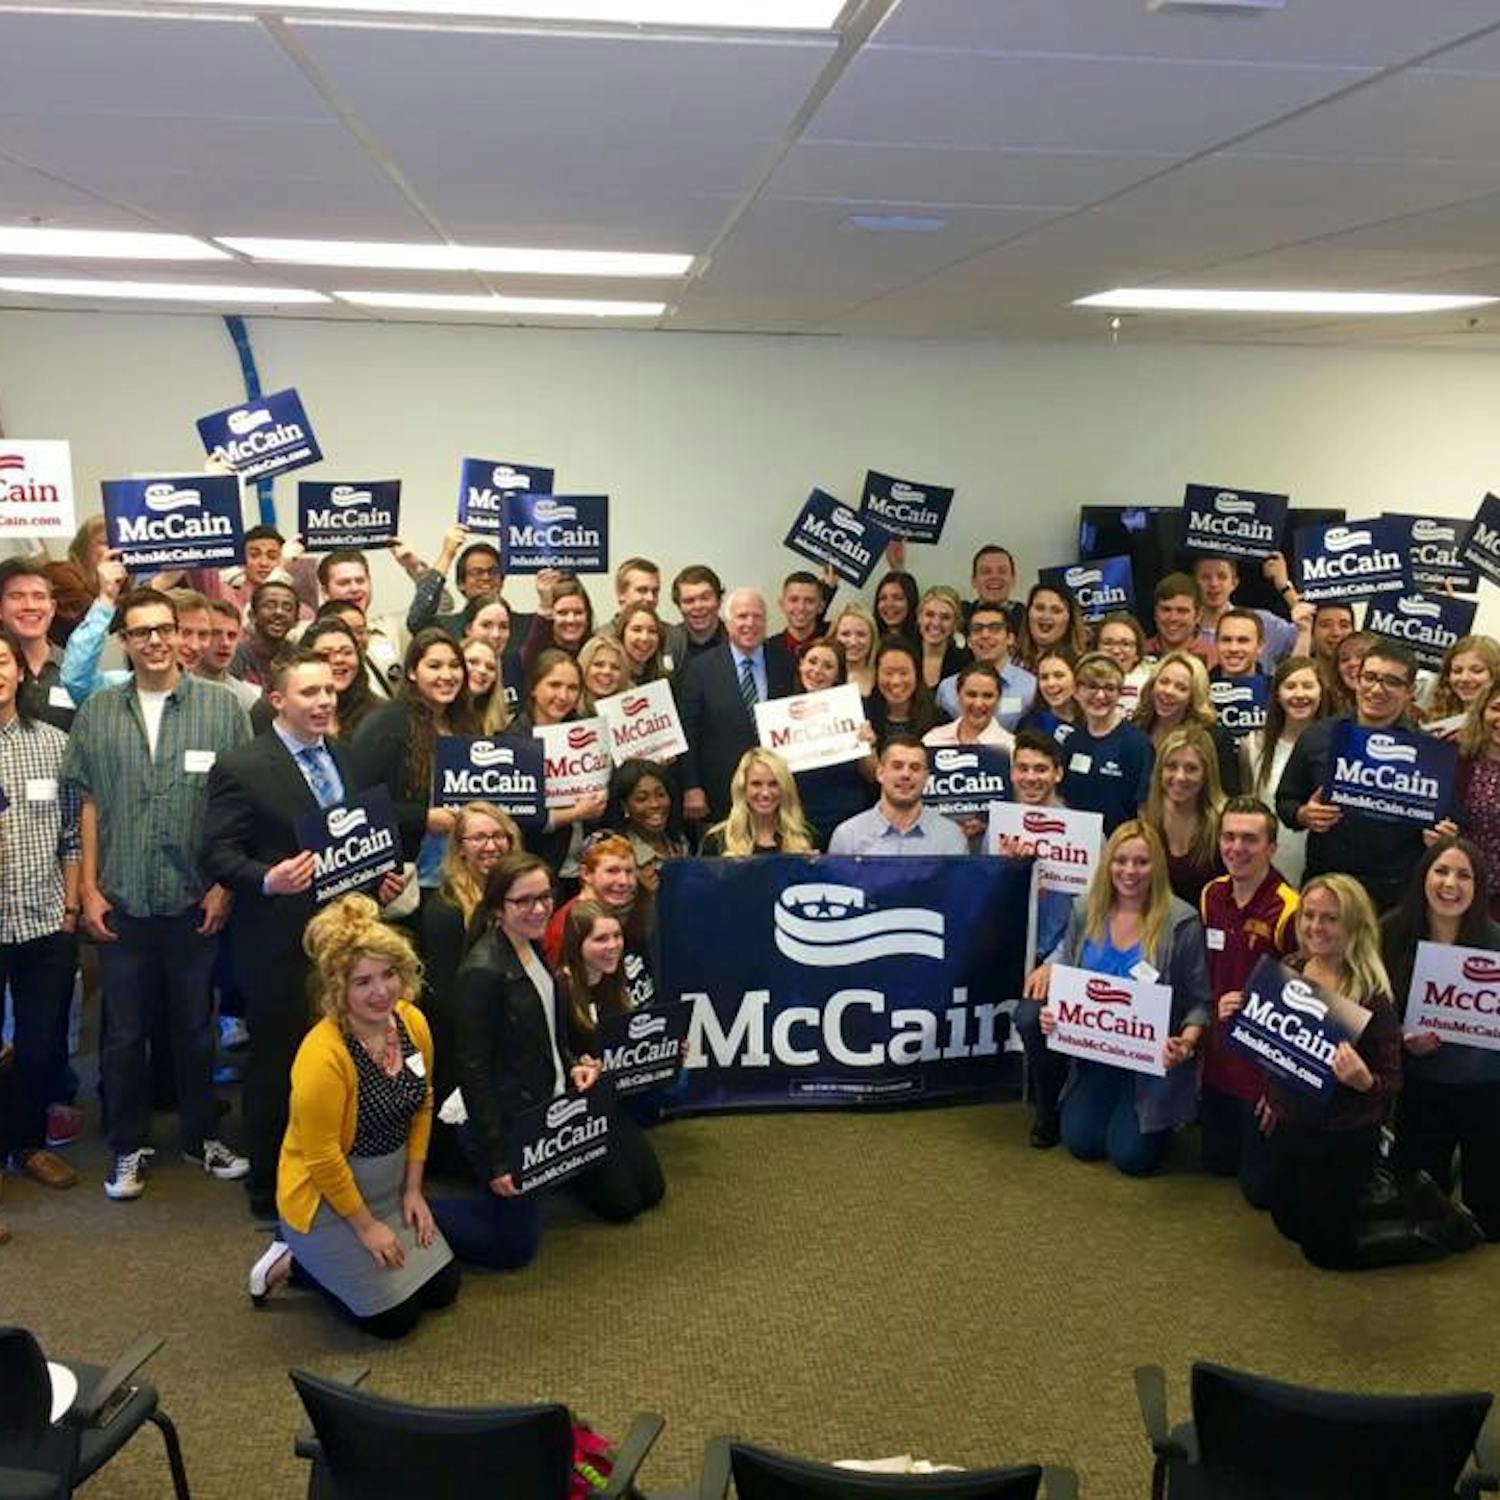 Sen. John McCain and his campaign staff gather&nbsp;to support his cause. Photos courtesy of @TeamMcCain